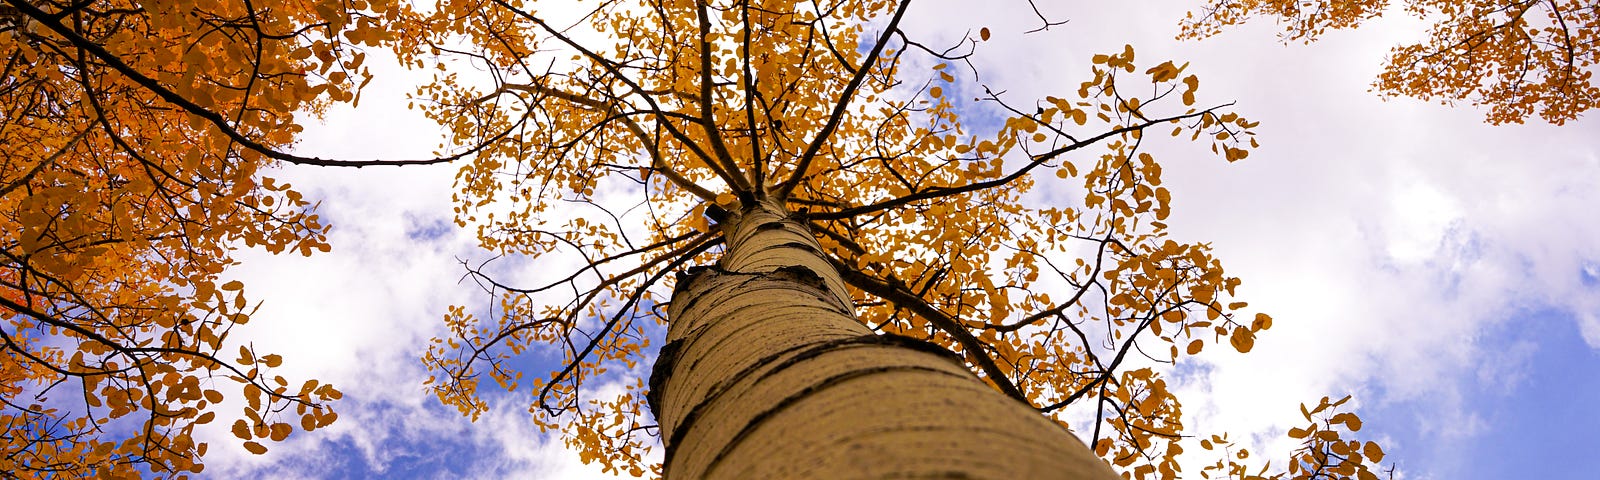 White aspen with golden leaves against a cloudy, blue sky.